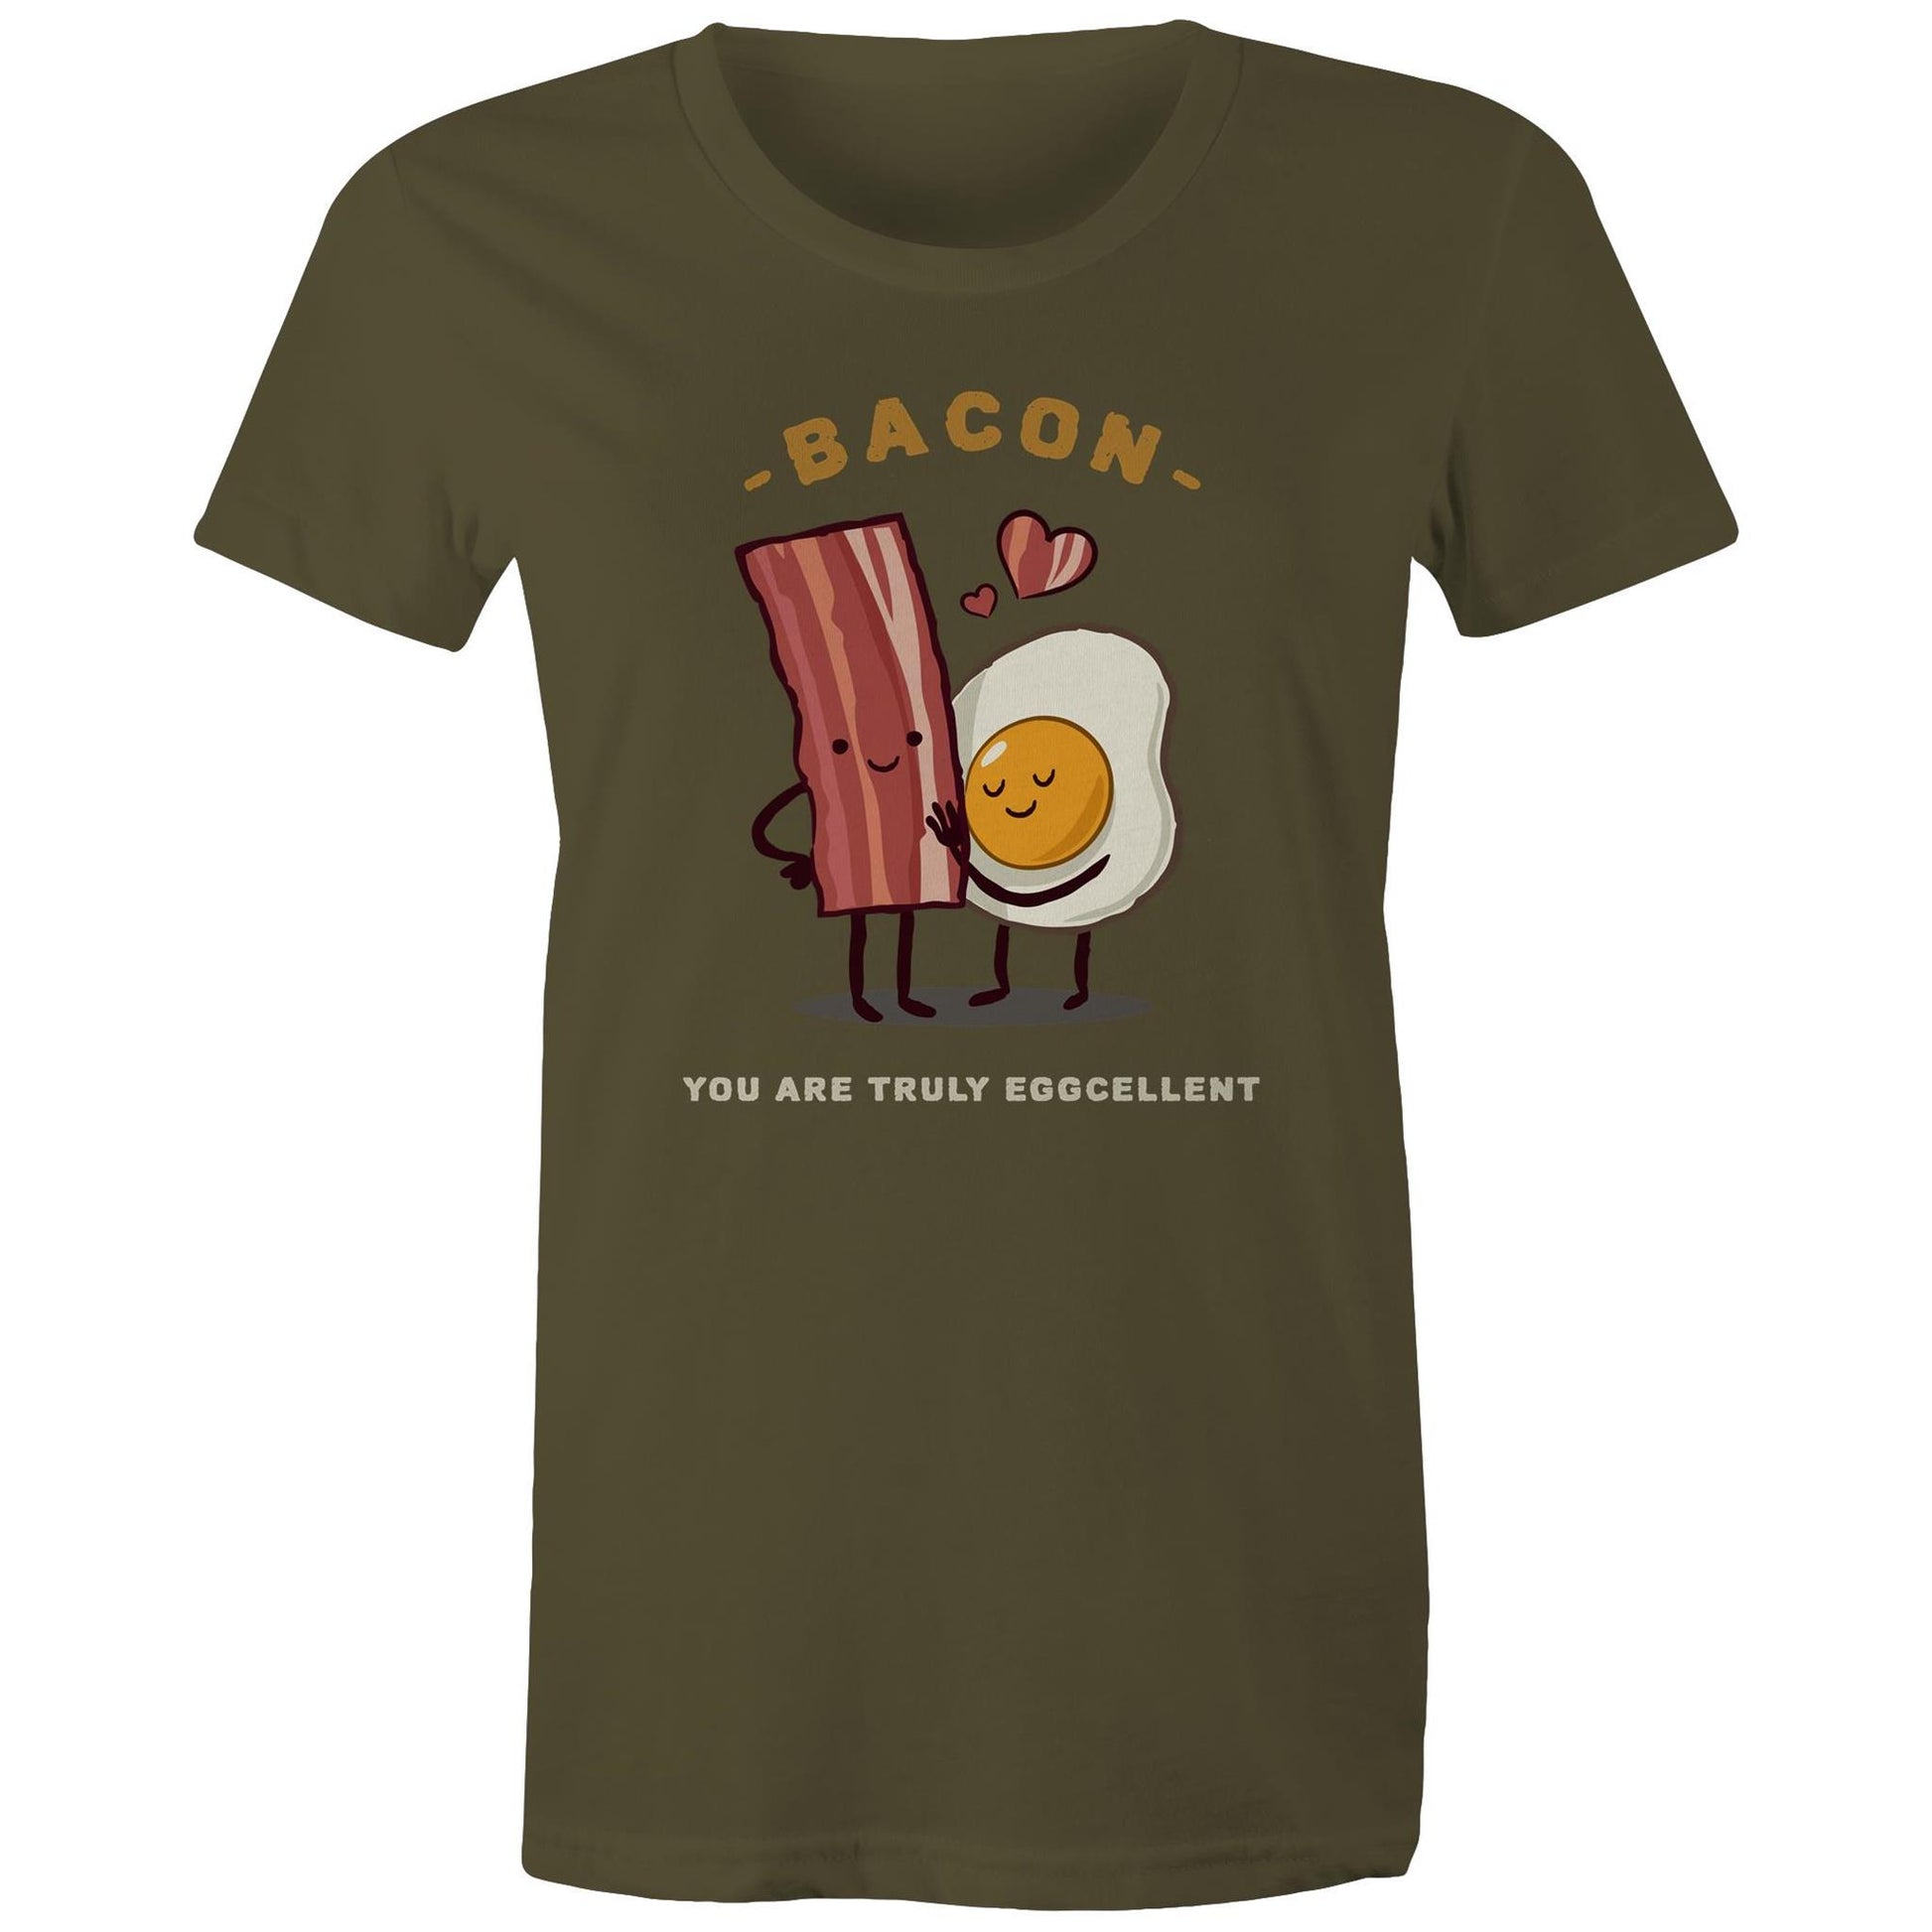 Bacon, You Are Truly Eggcellent - Womens T-shirt Army Womens T-shirt Food